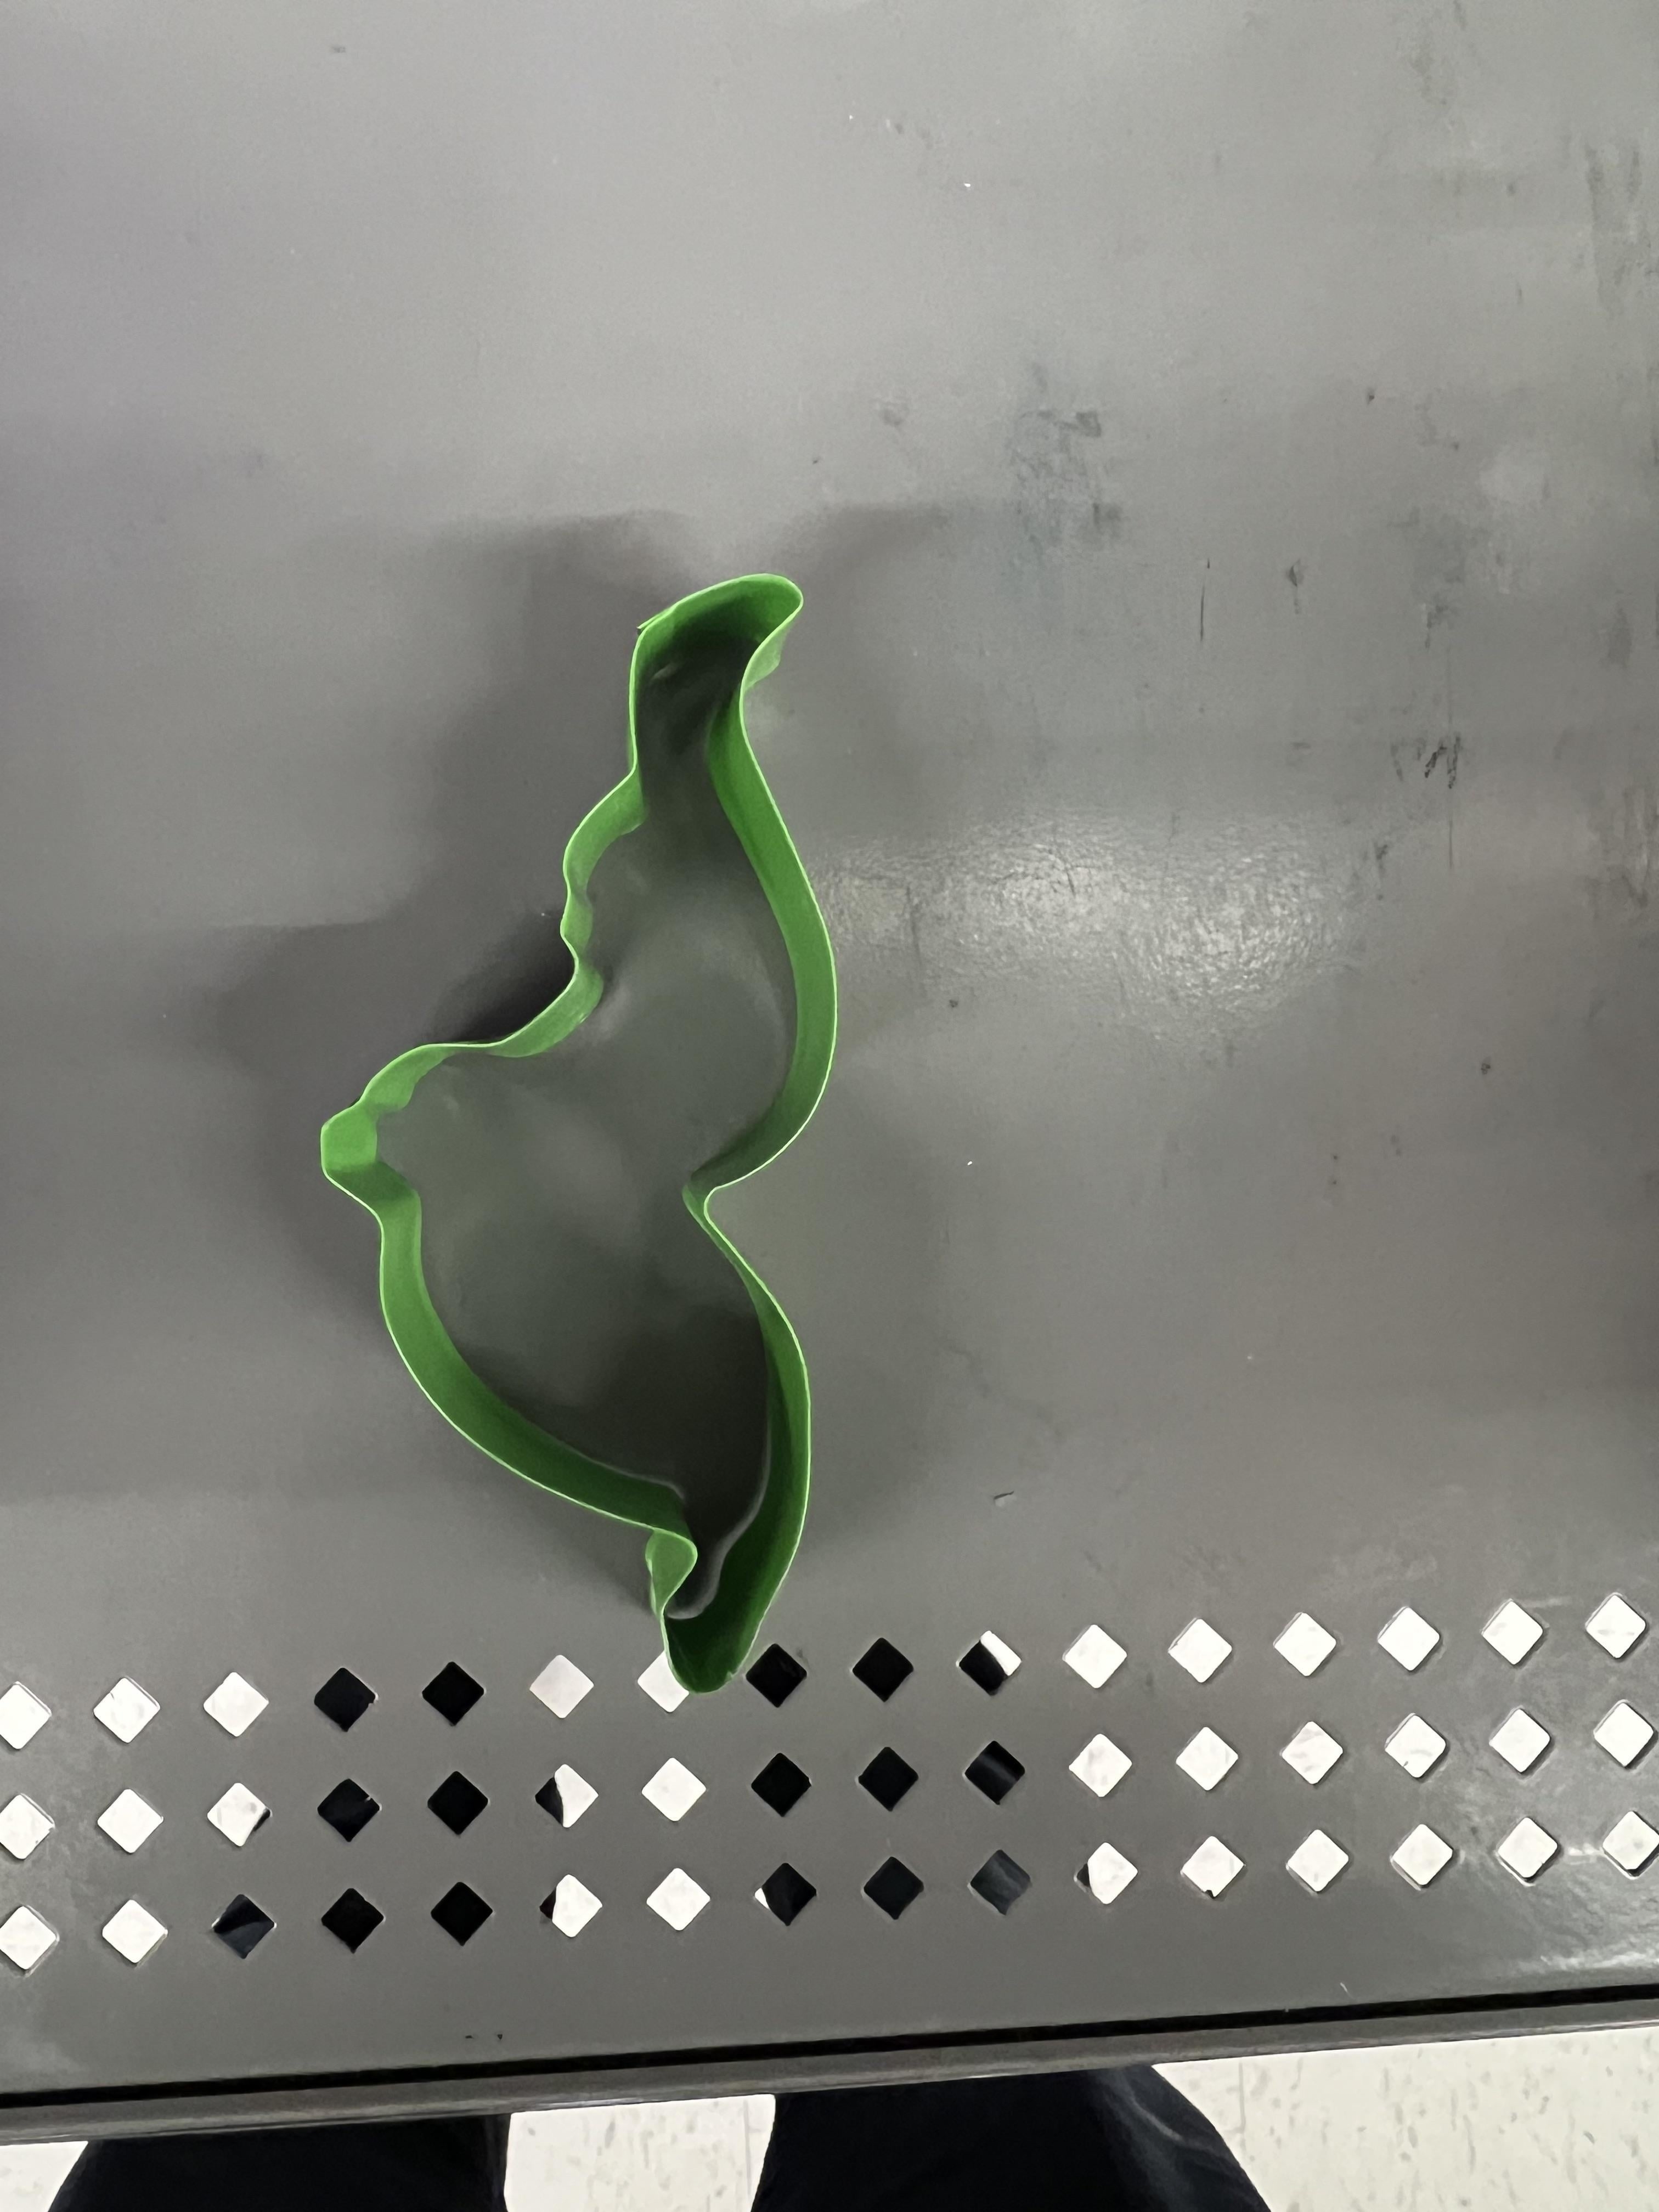 Cookie cutter that&#x27;s difficult to identify but could be side view of a pregnant person